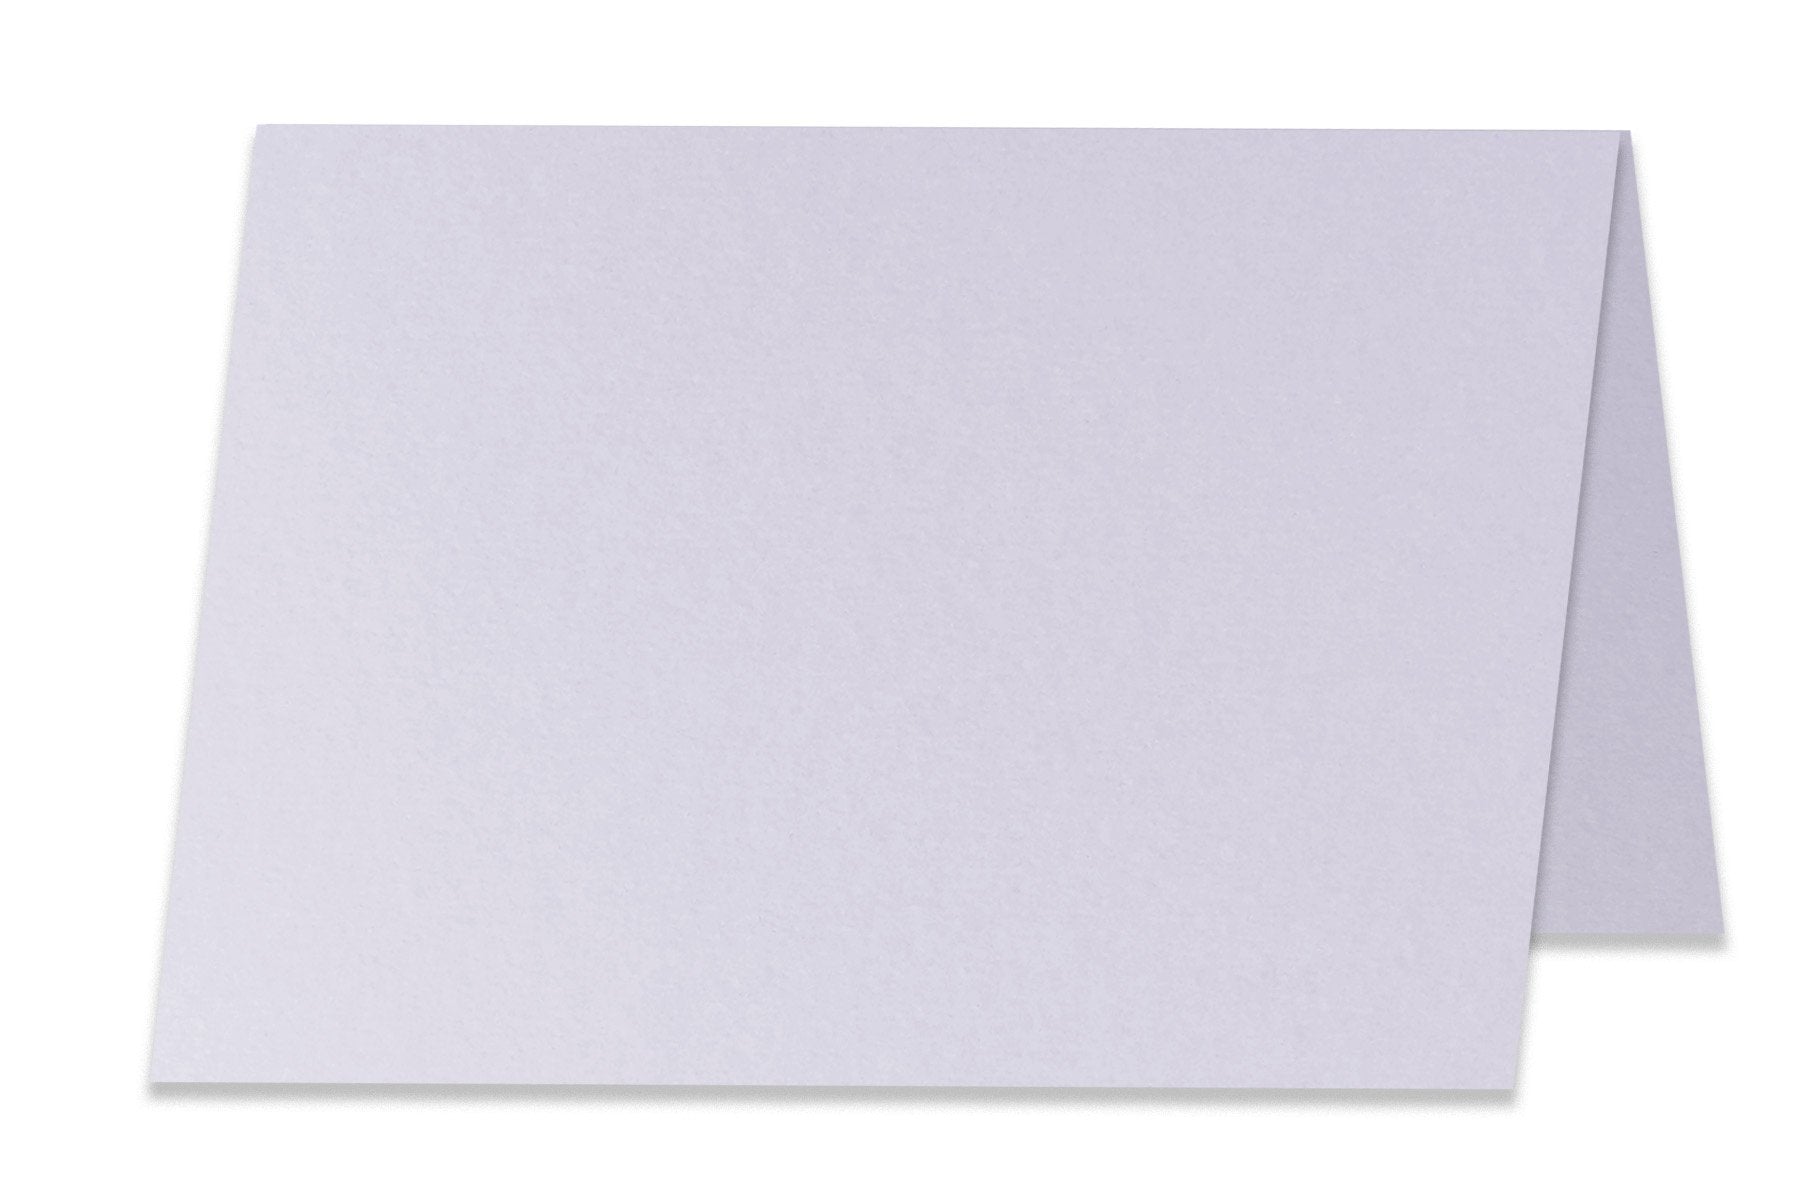 Blank Shimmer 4x6 Folded Discount Card Stock for DIY Cards - CutCardStock